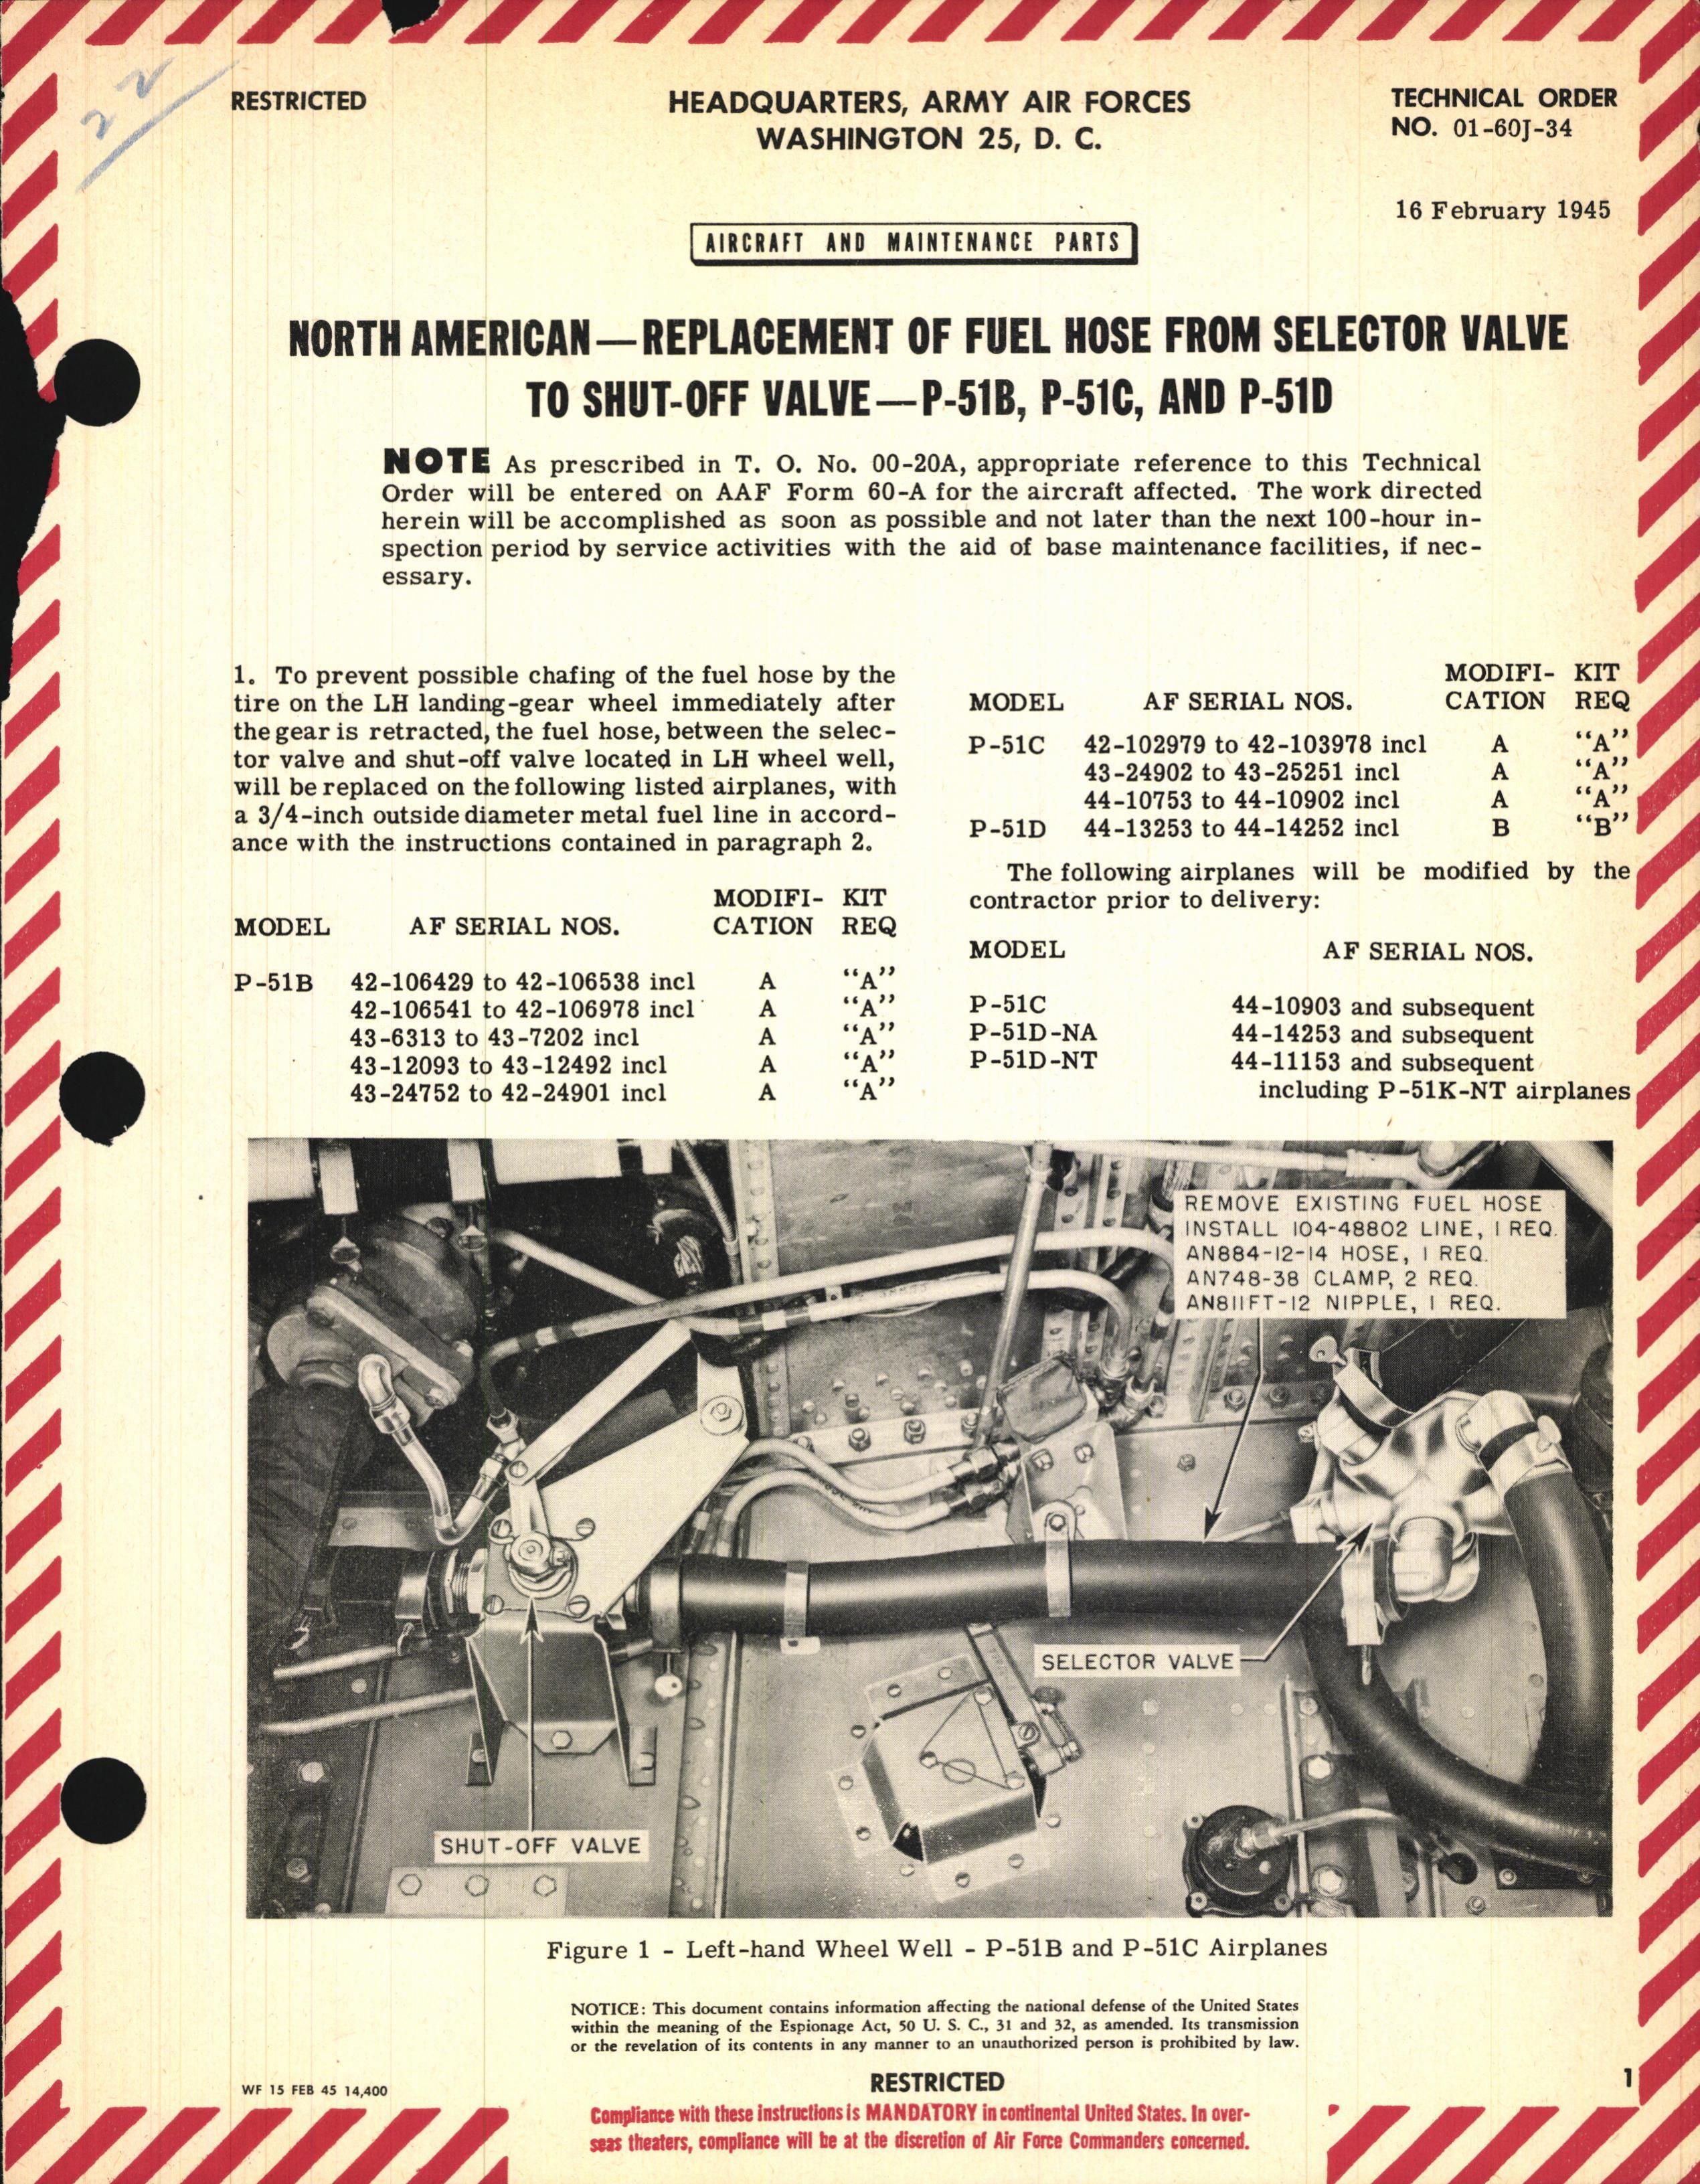 Sample page 1 from AirCorps Library document: Replacement of Fuel Hose from Selector Valve to Shut-Off Valve for P-51B, C, and D